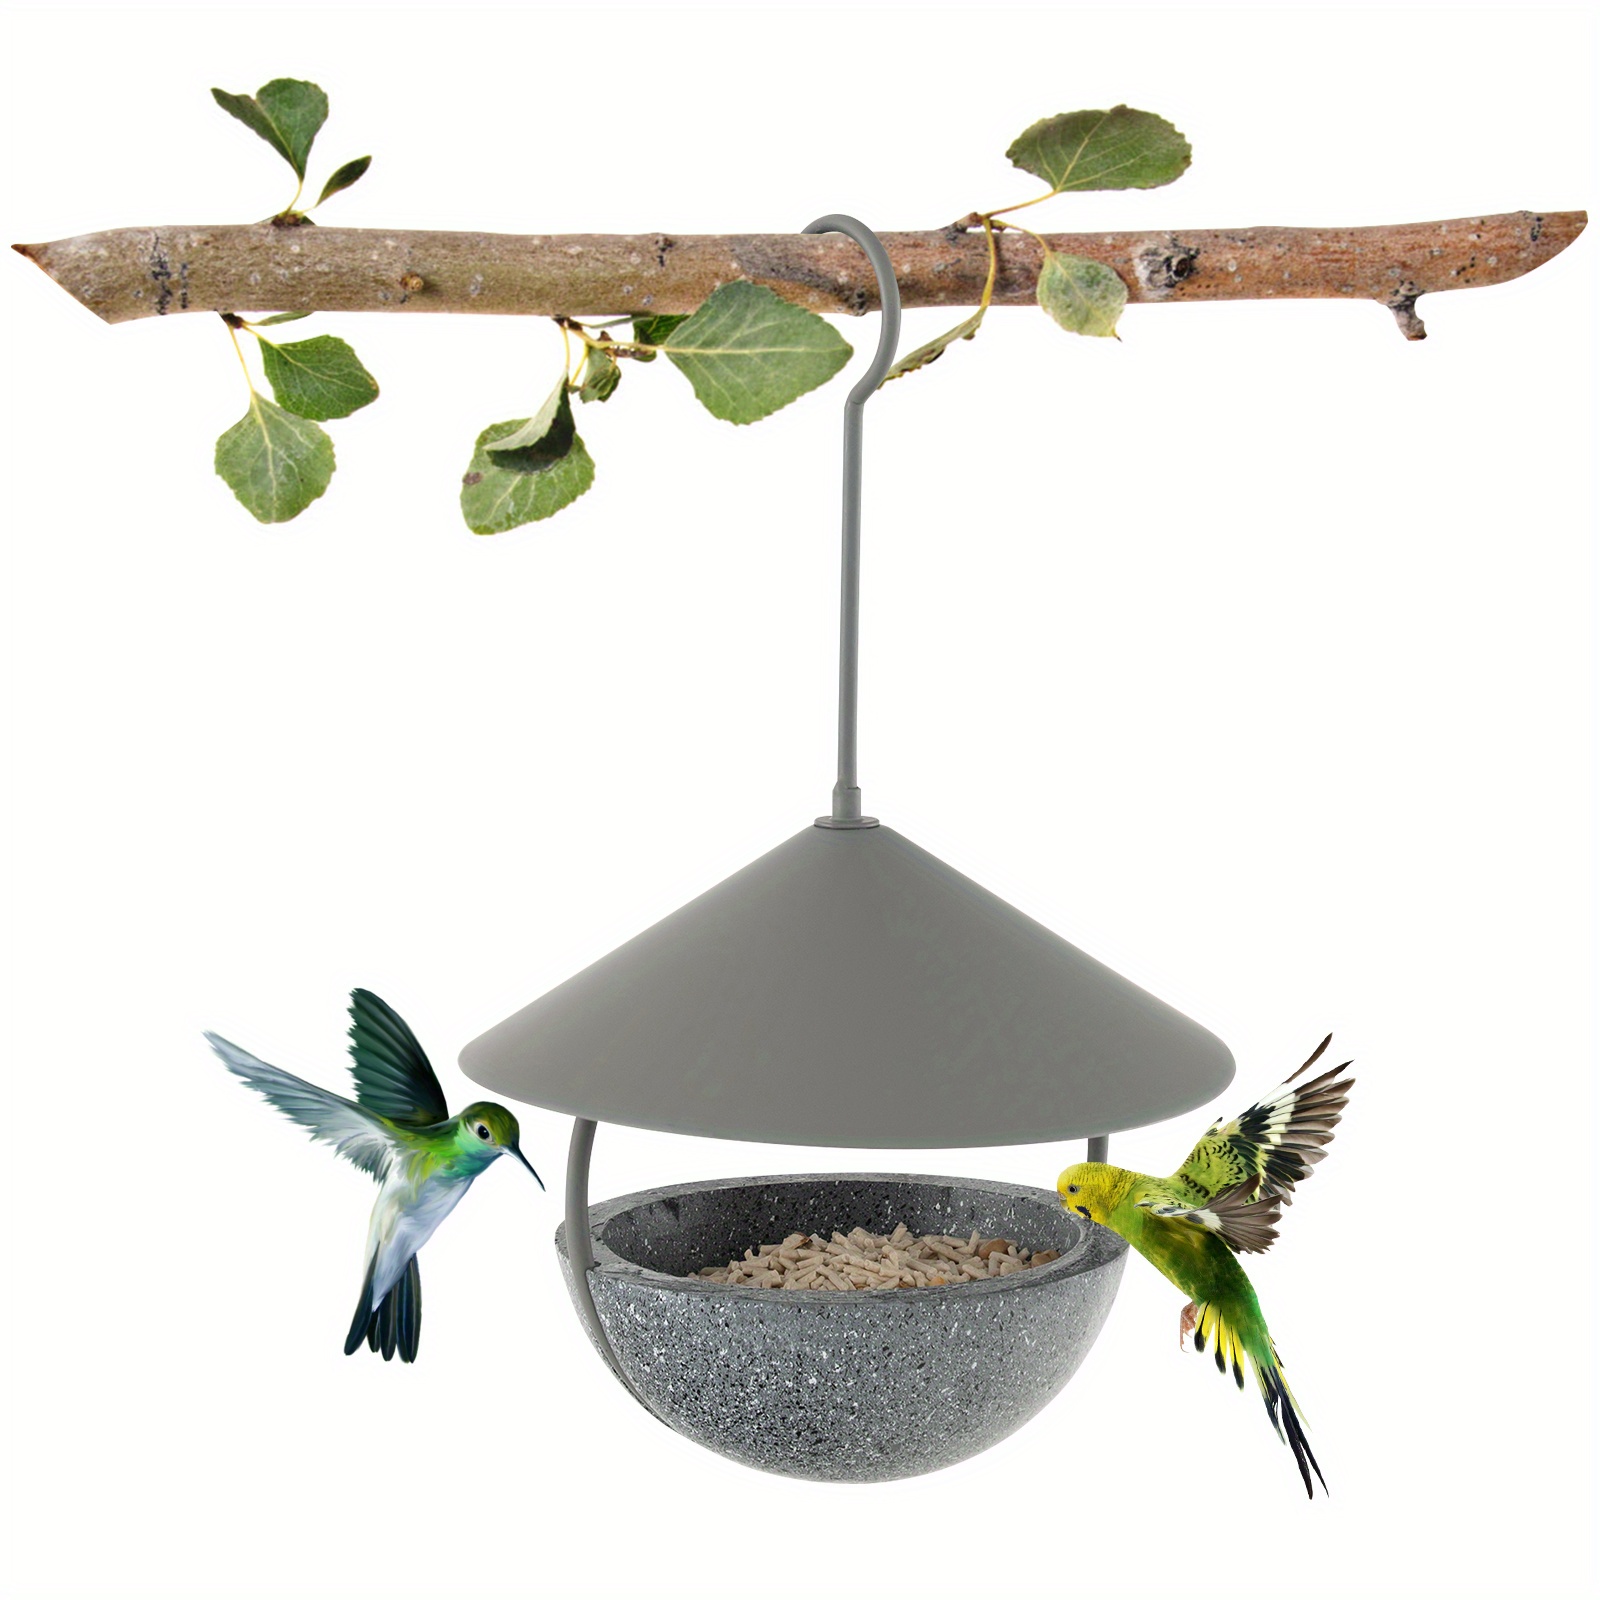 

Lifezeal Metal Bird Feeder Bath For Outdoors Hanging W/ Resin Dome & Water Bowl